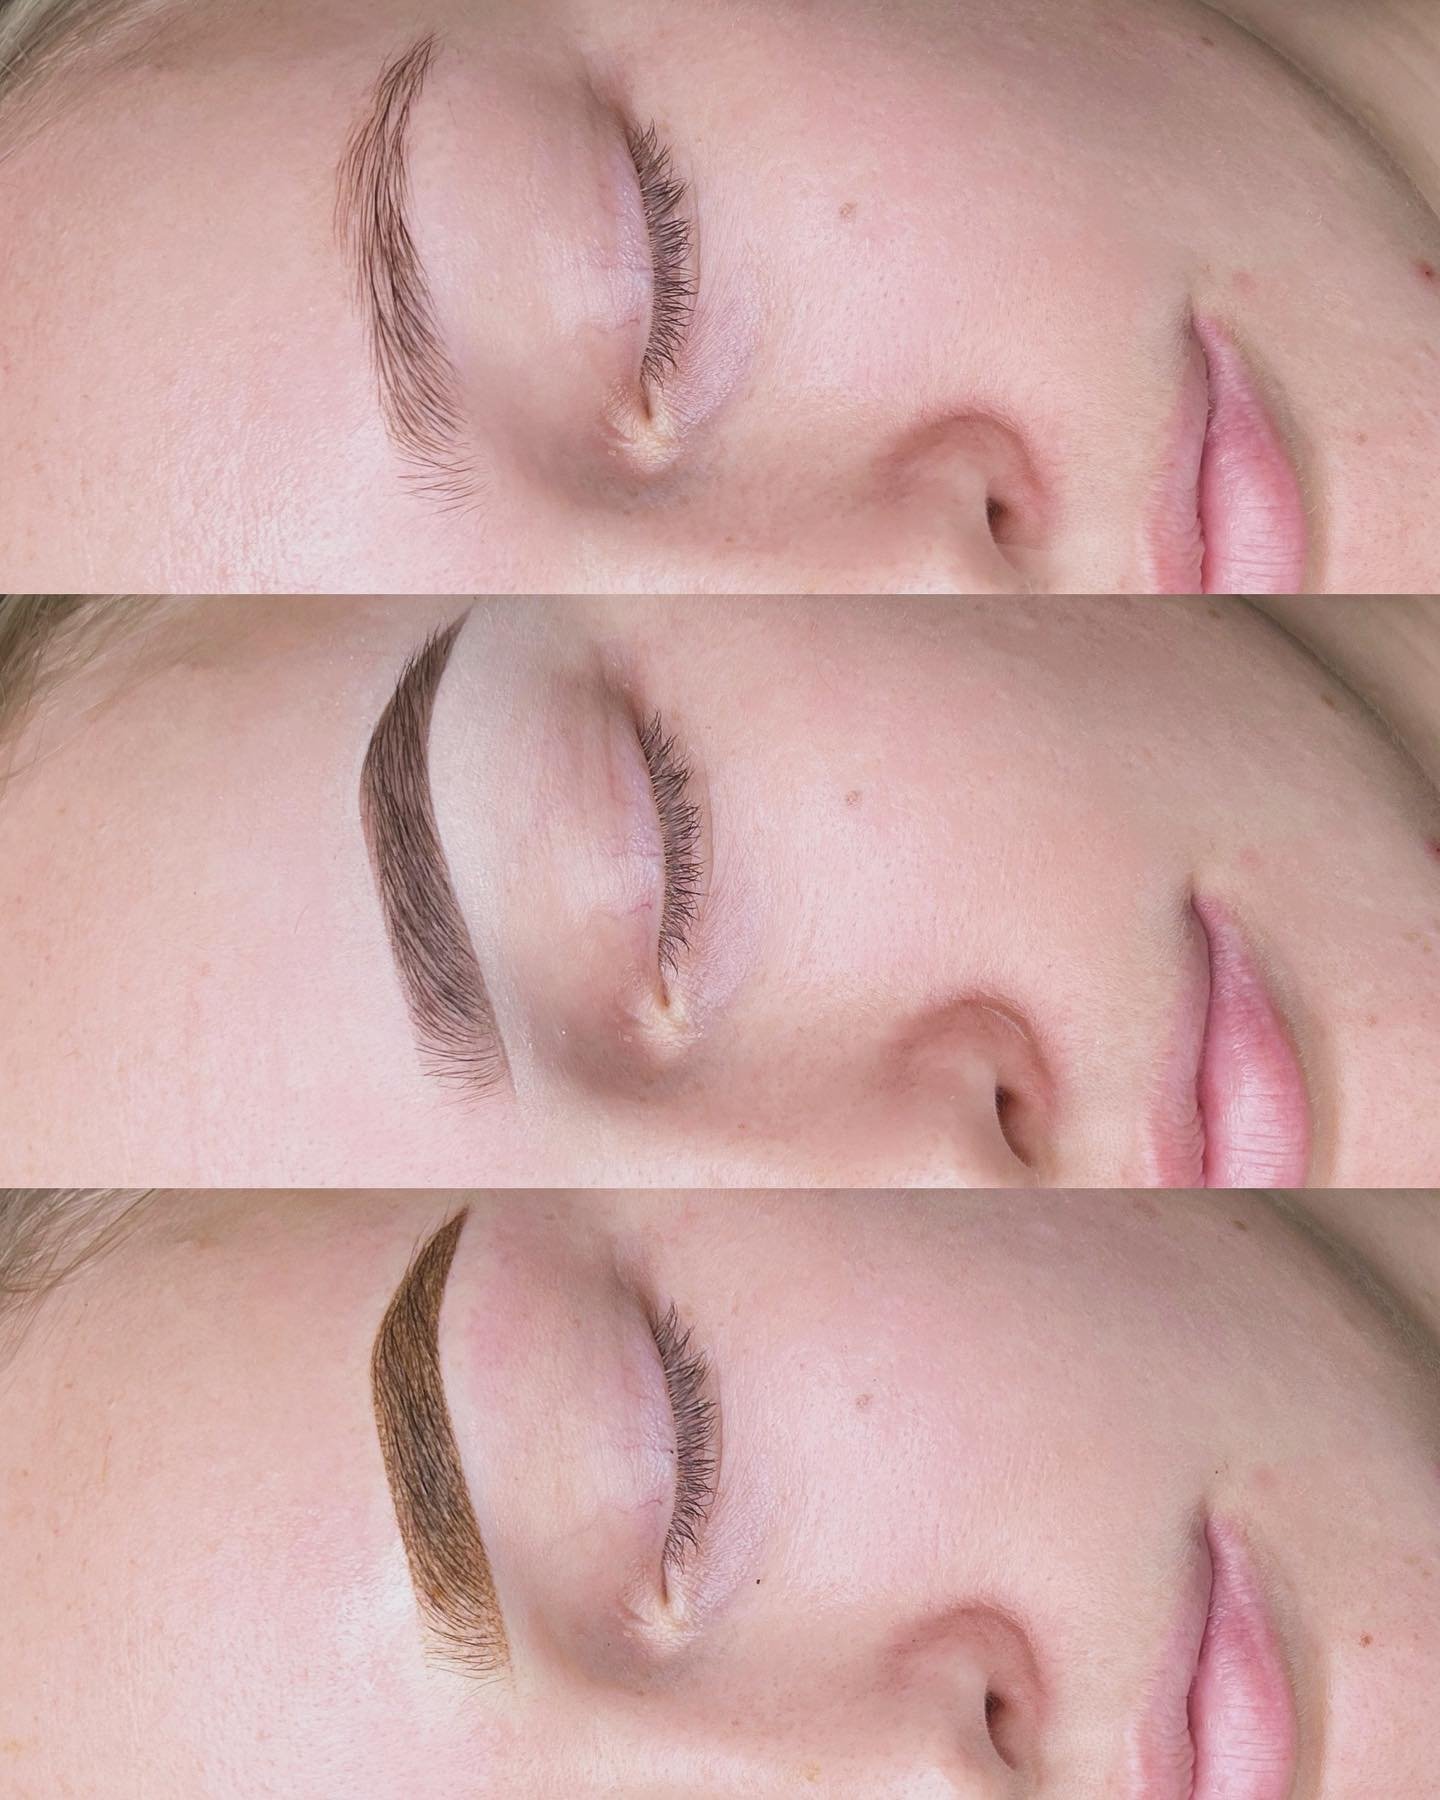 OMBRE BROWS 💭 Comment your fave below 👇🏼 

1. Before | Mapped | After 
2. Low maintenance, smudge proof brows for this babe.
3. The prettiest tattooed brows you ever did see by Sarah ✨ 
4. Sharp and defined dark blonde Ombre brows 🤤
5. Patches be